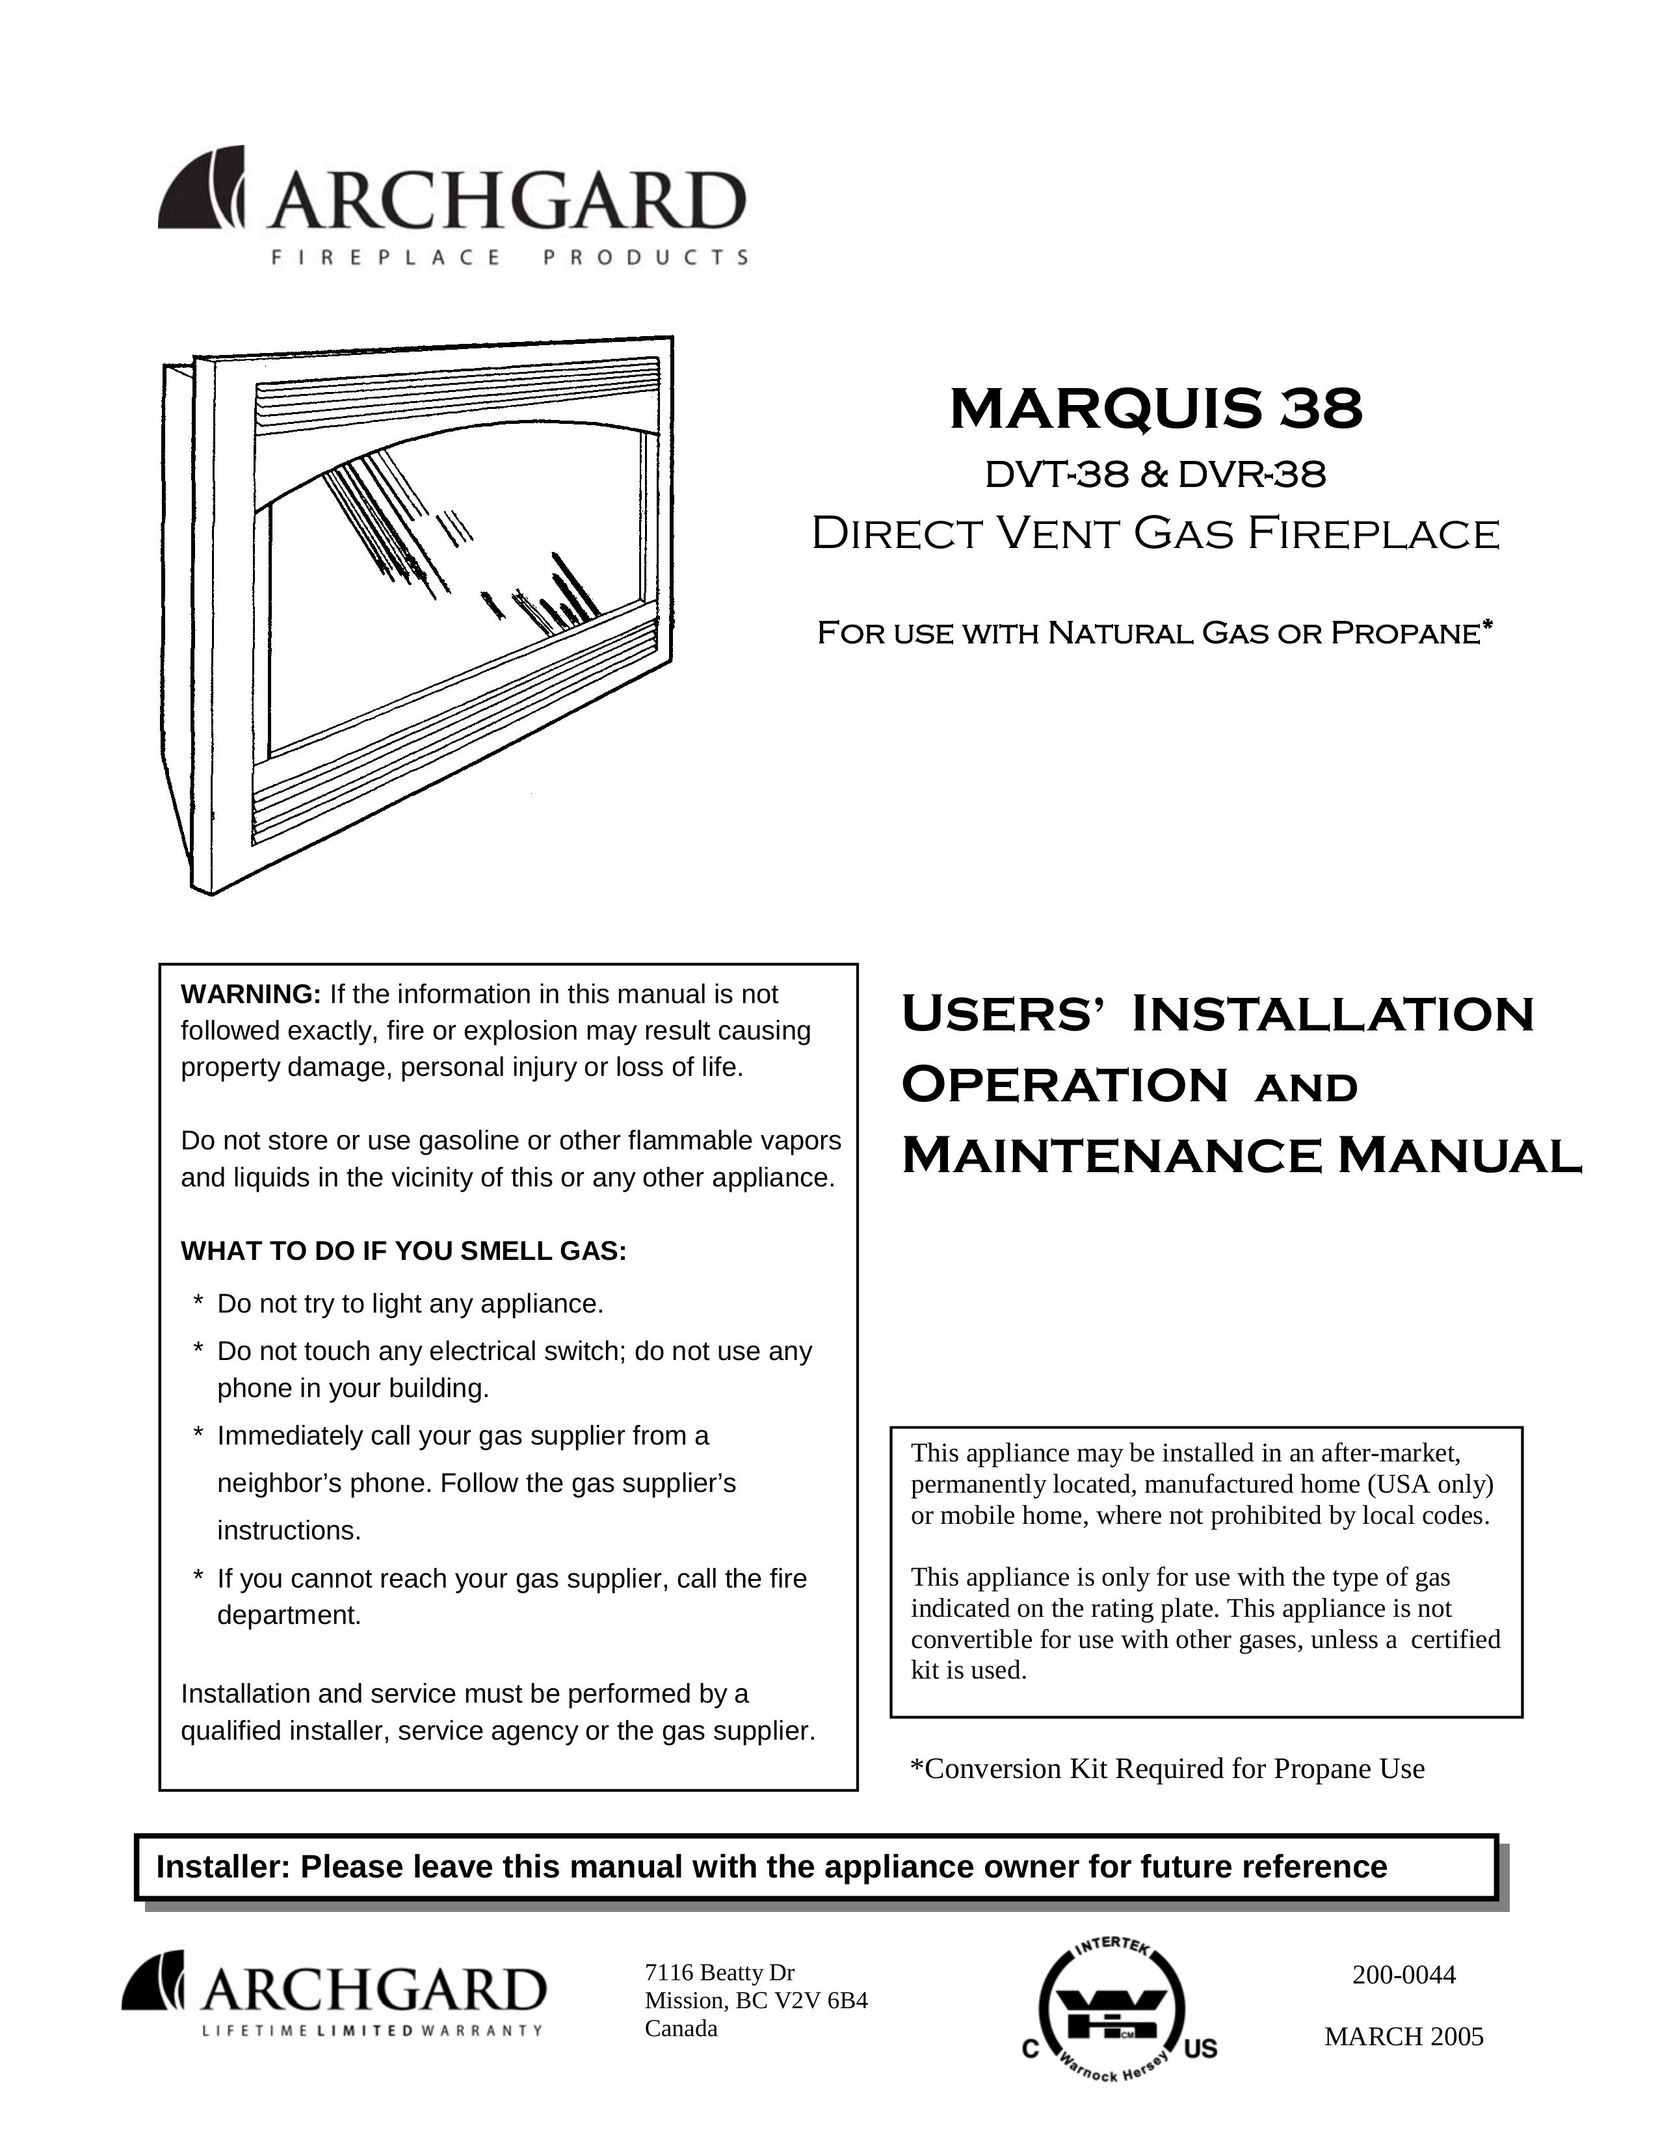 Marquis DVT-38 Indoor Fireplace User Manual